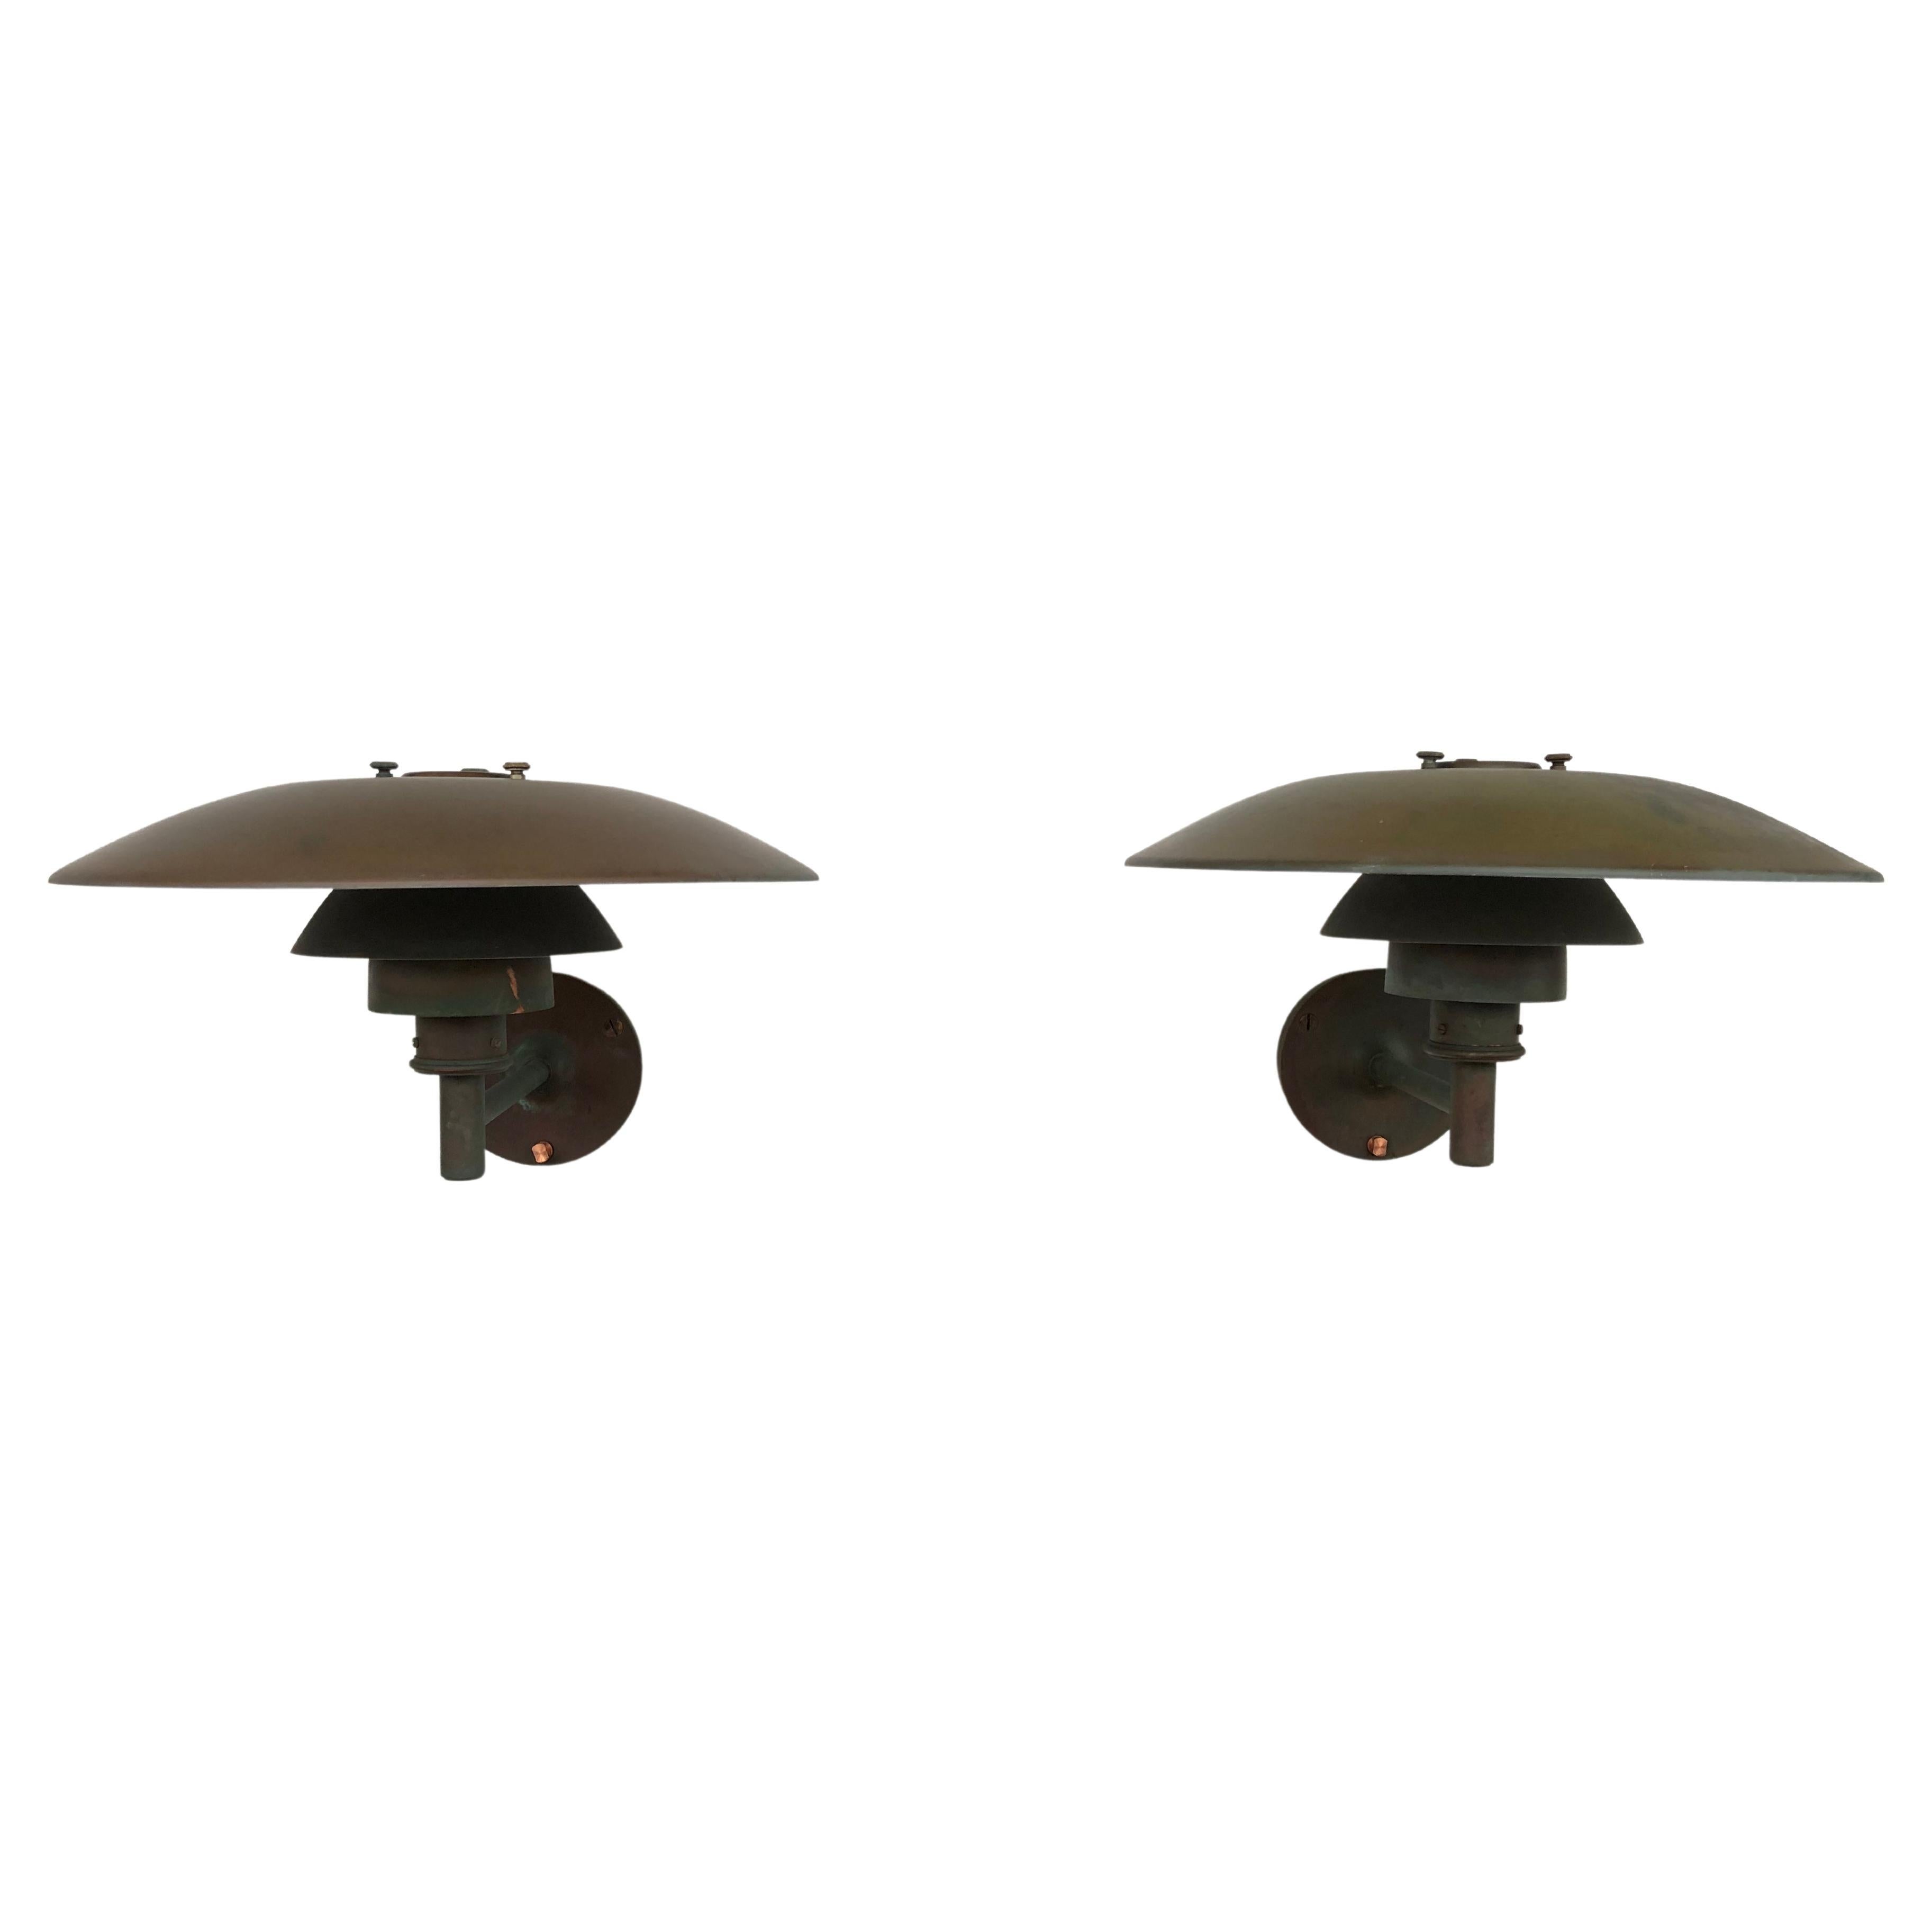 Pair of Iconic Poul Henningsen Copper Wall Lamps by Louis Poulsen of DK